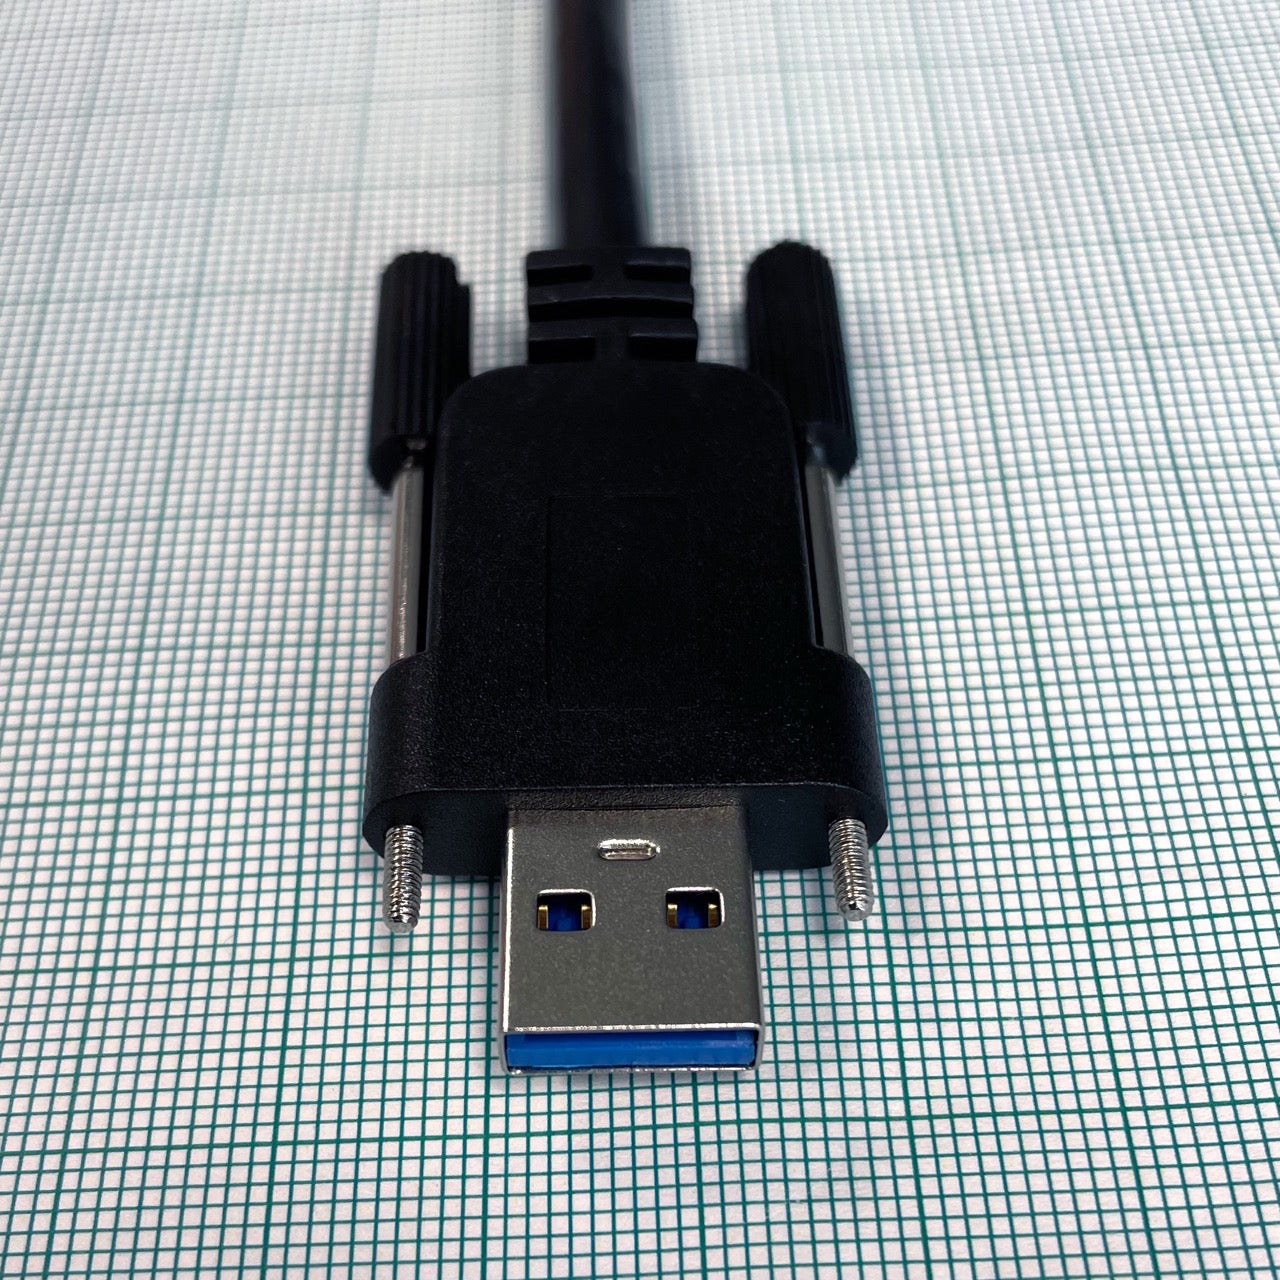 Perspective view of Type A USB 3.0 Vision screw lock connector